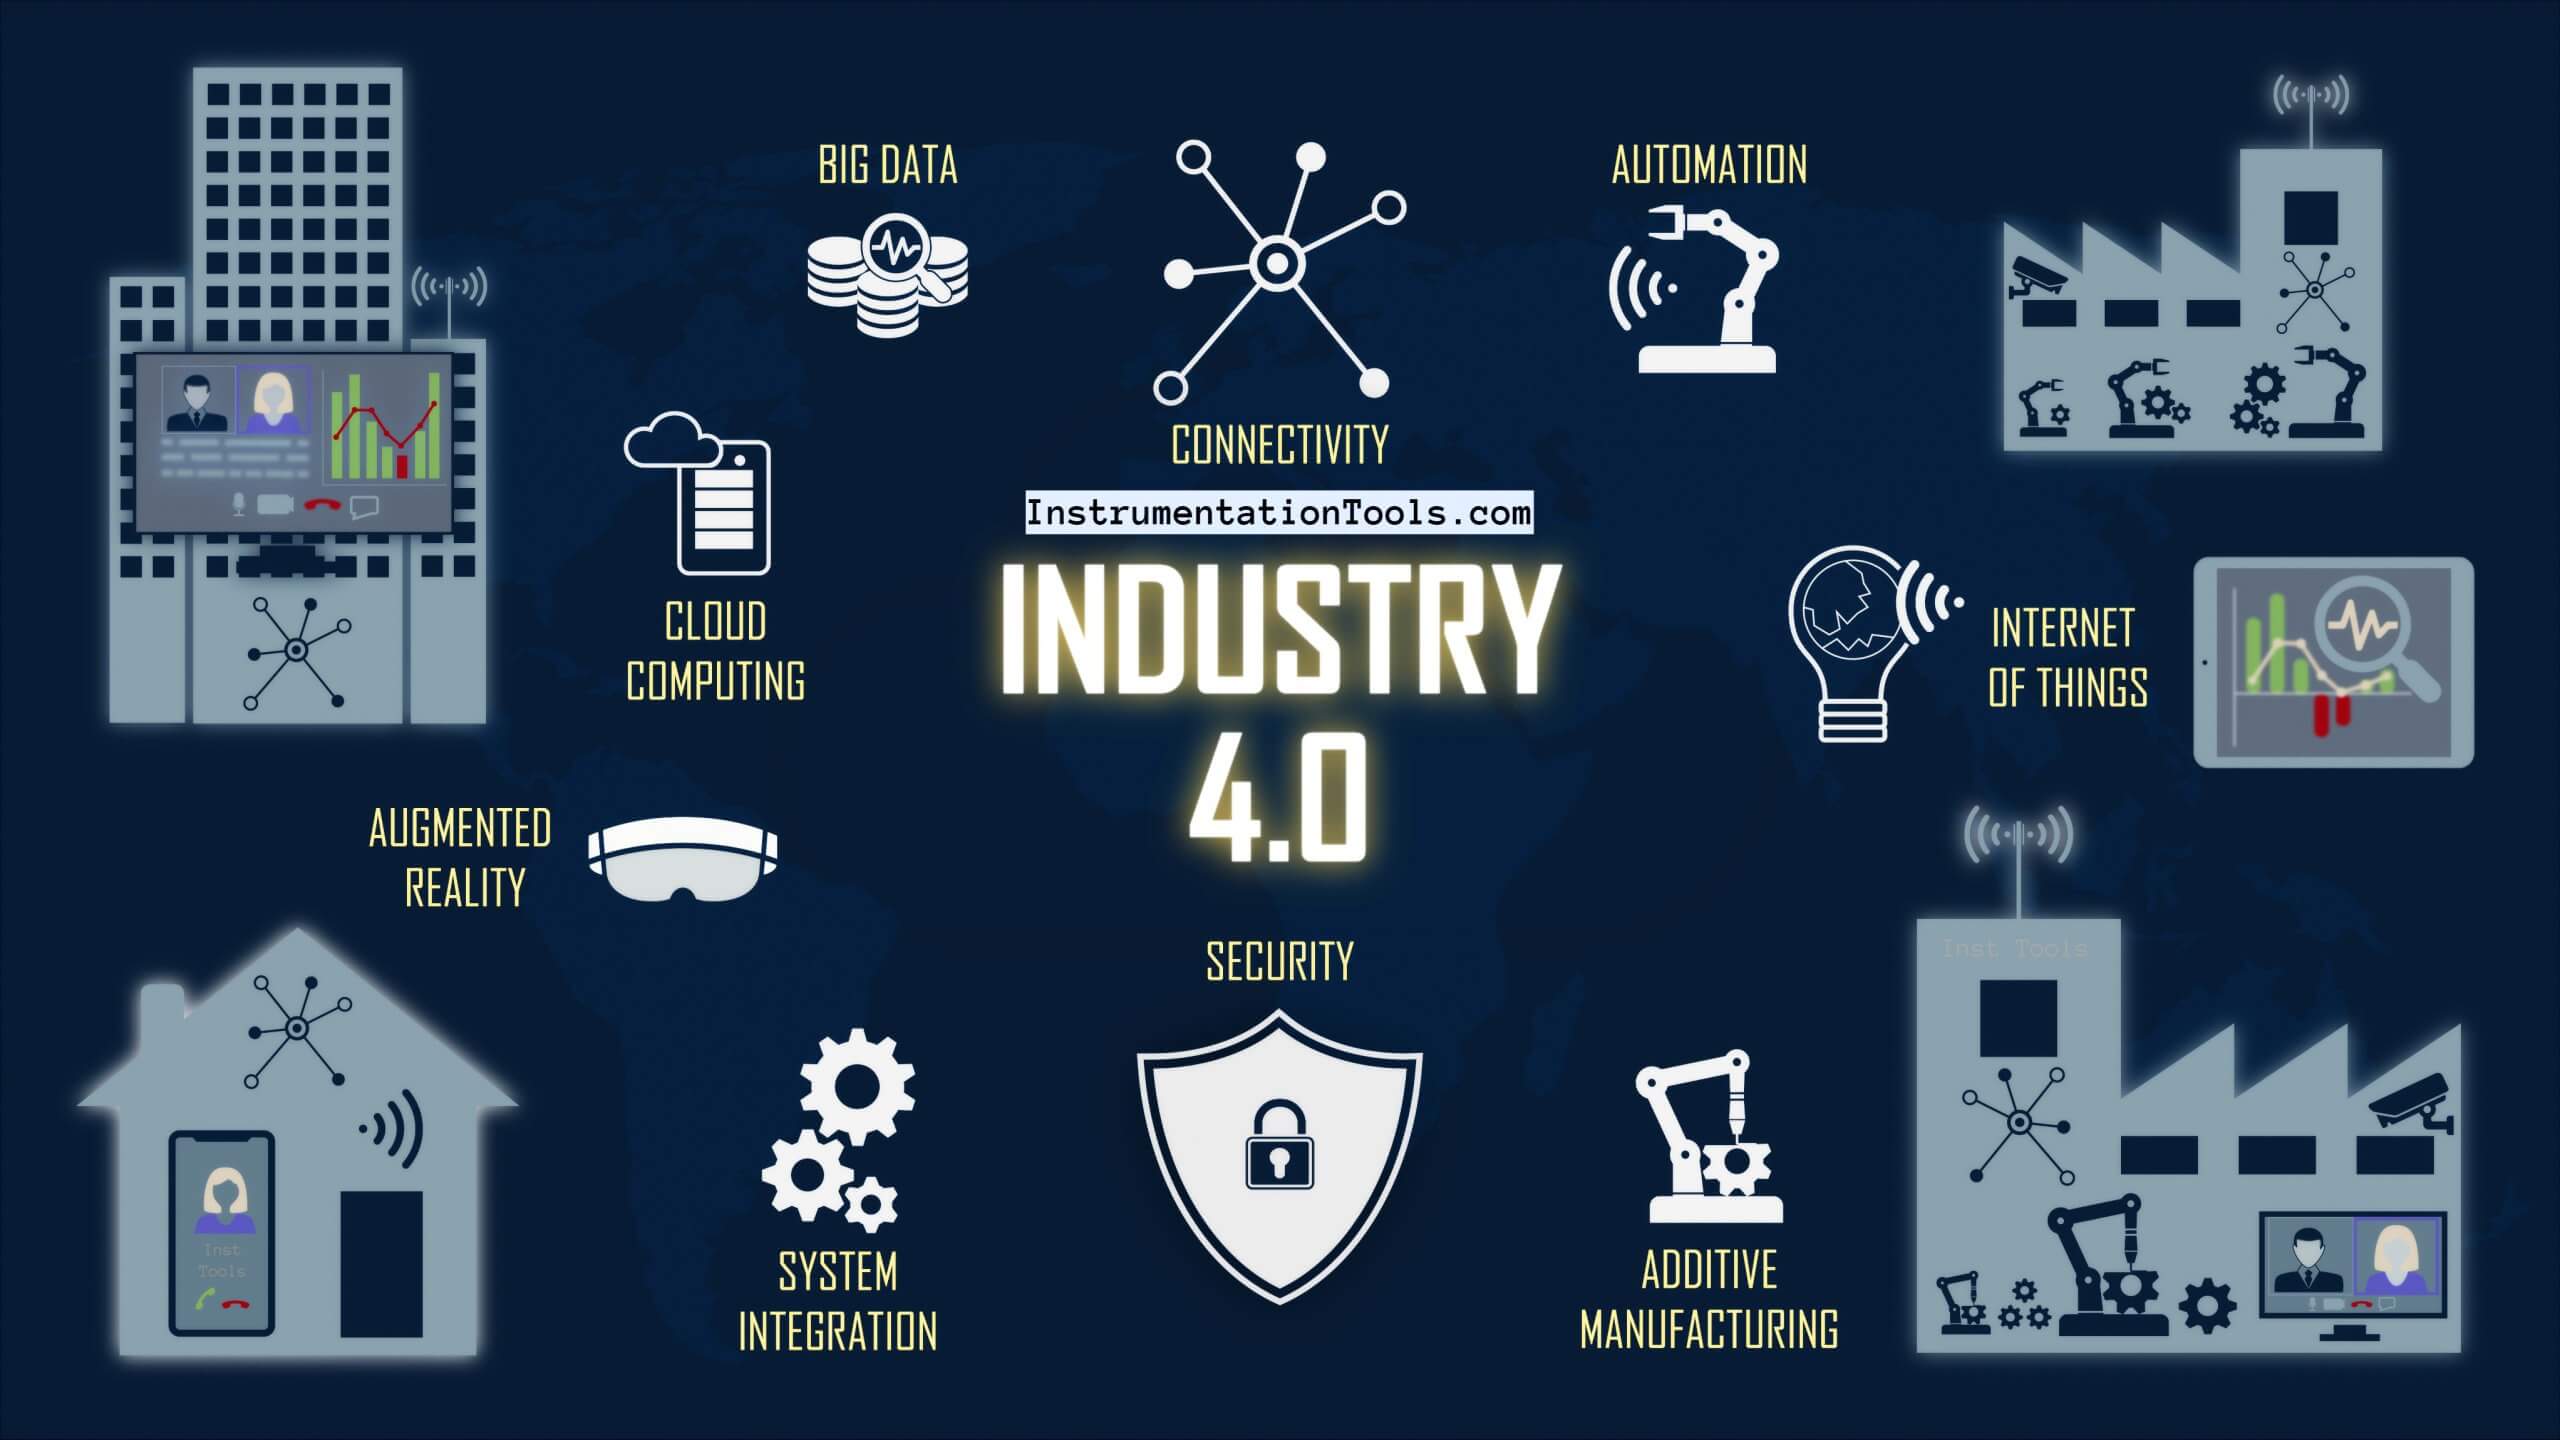 Industry 4.0 Explained